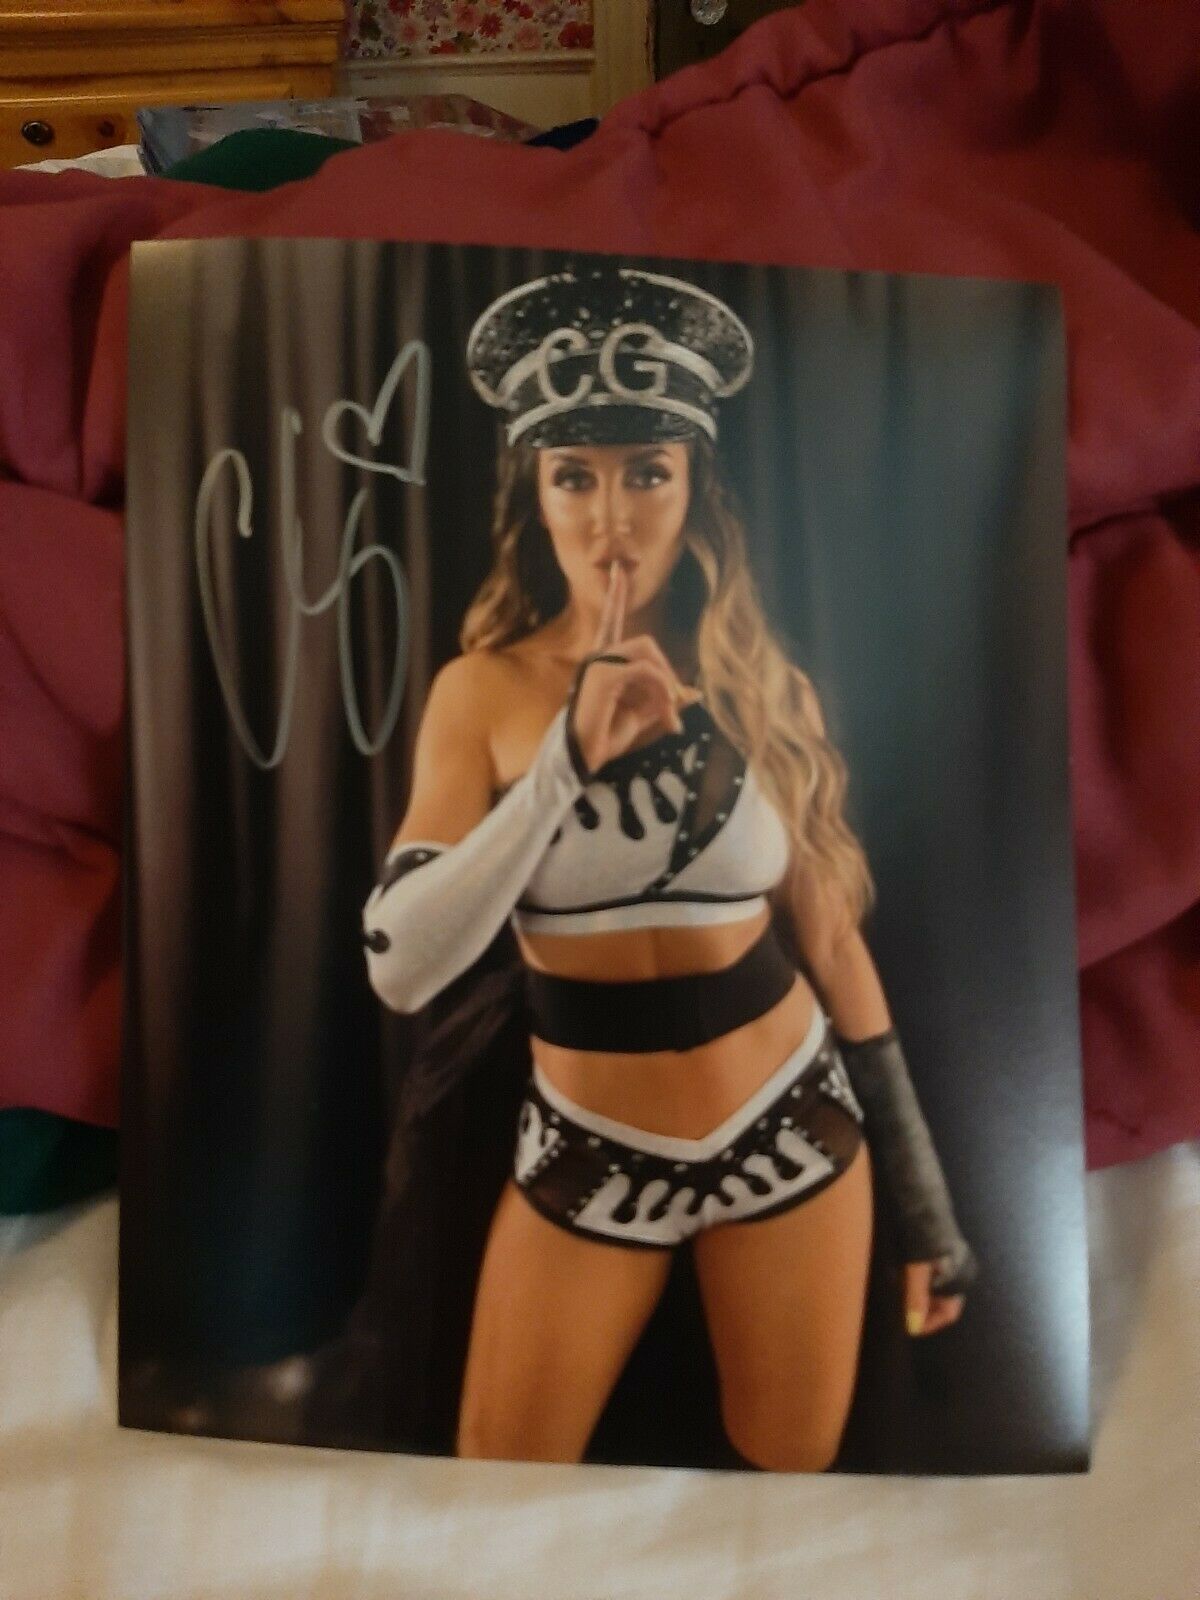 CHELSEA GREEN Autographed 8 x 10 Photo WWE/TNA/ROH with Photo Proof of Sig